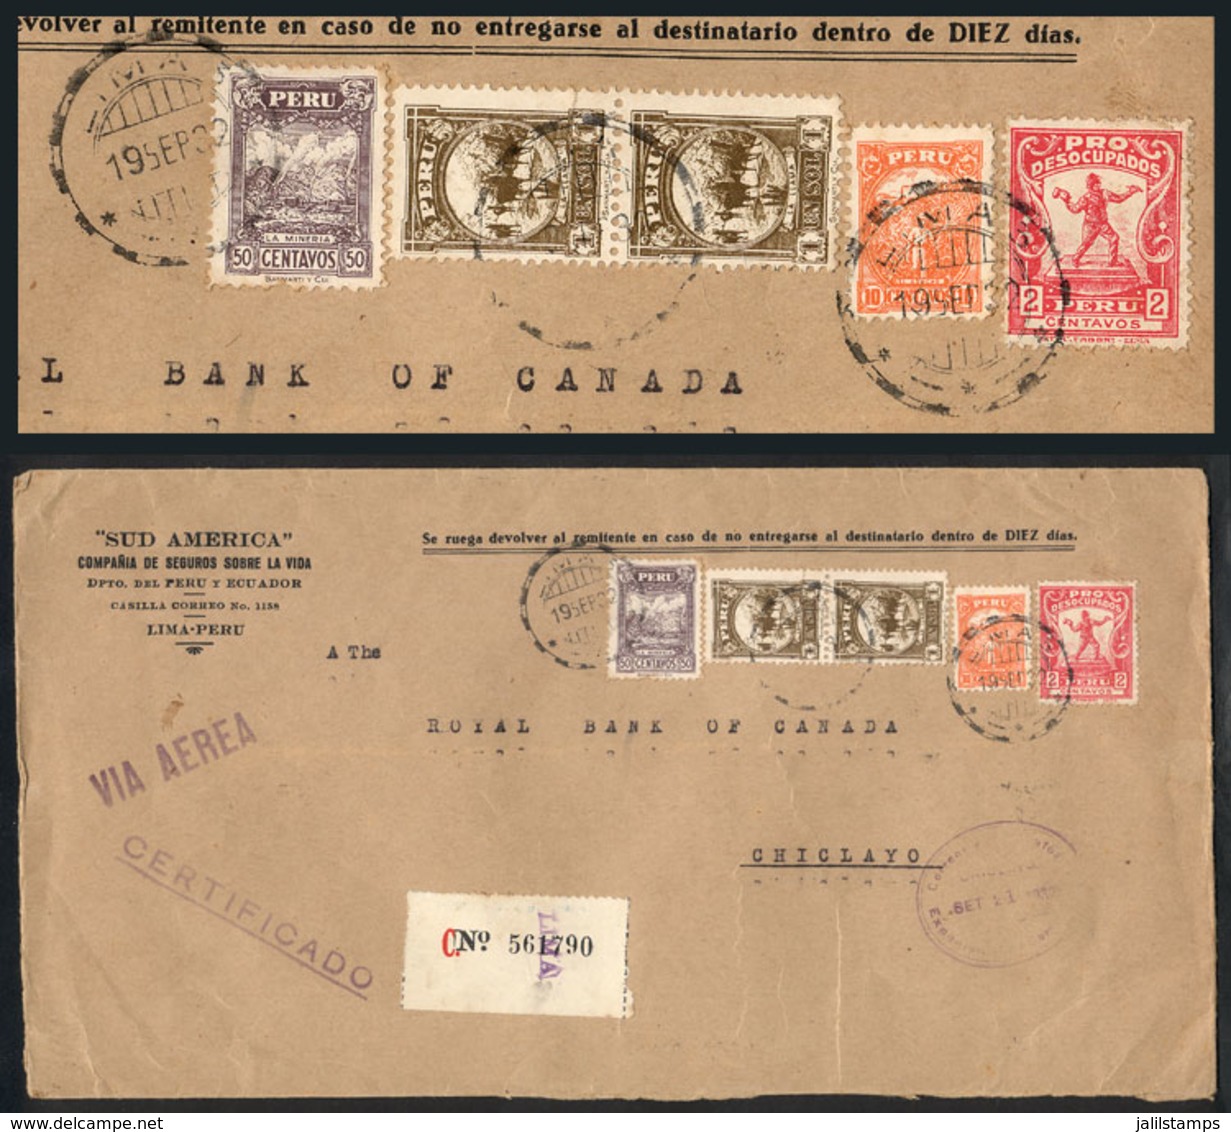 PERU: 19/SE/1932 Lima - Chiclayo, Registered Airmail Cover Franked With 2.60S. + 2c. Cinderella Pro-Desocupados, Excelle - Peru